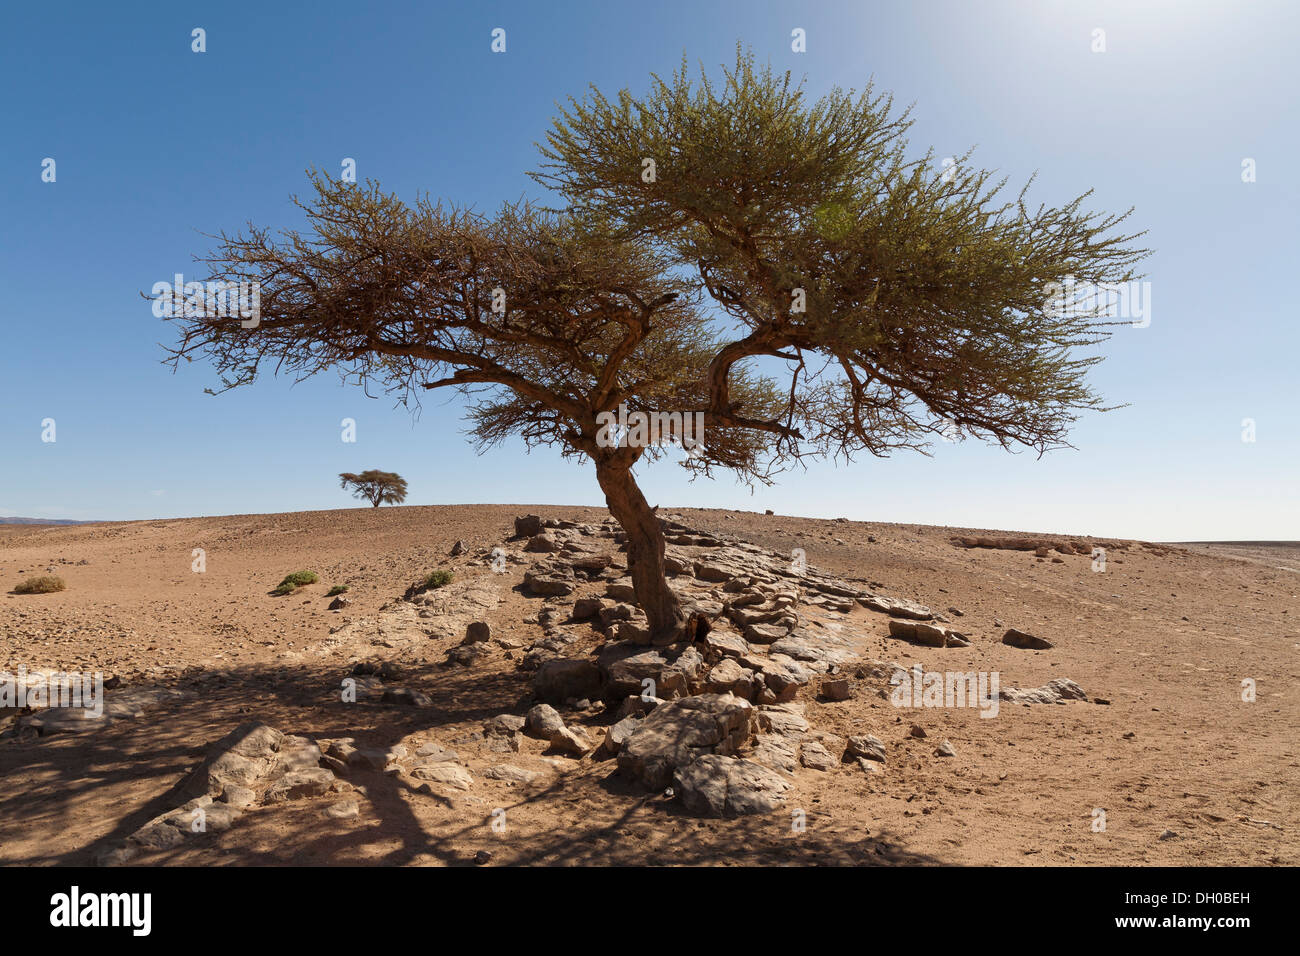 Single acacia tree in a rocky outcrop on the desert floor with a lone tree on the horizon Morocco Stock Photo